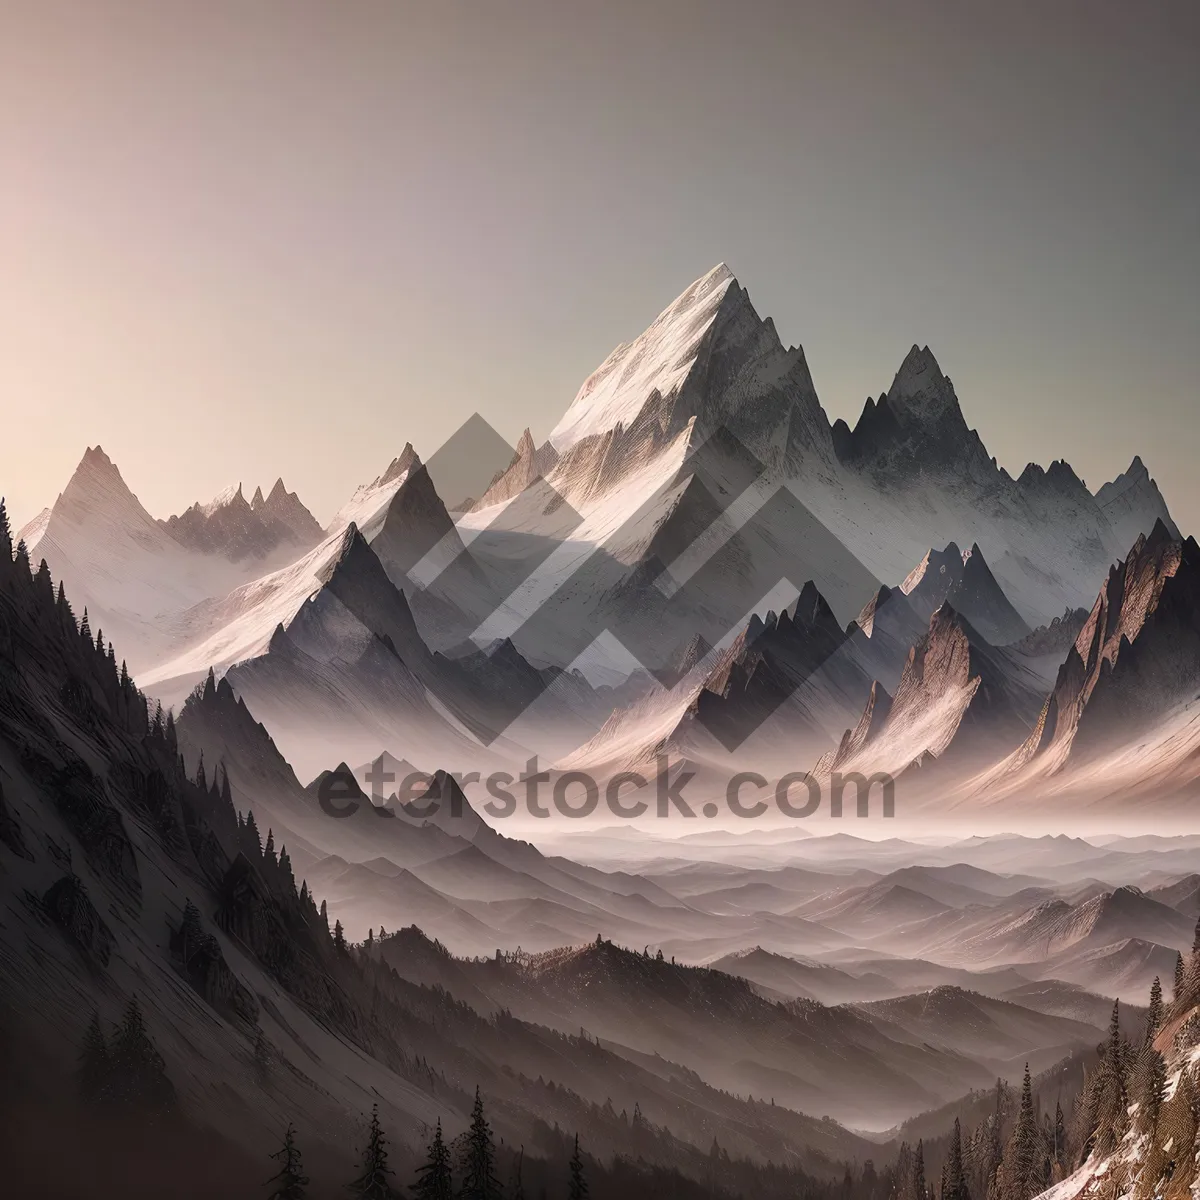 Picture of Snow-capped peaks in mesmerizing alpine landscape.